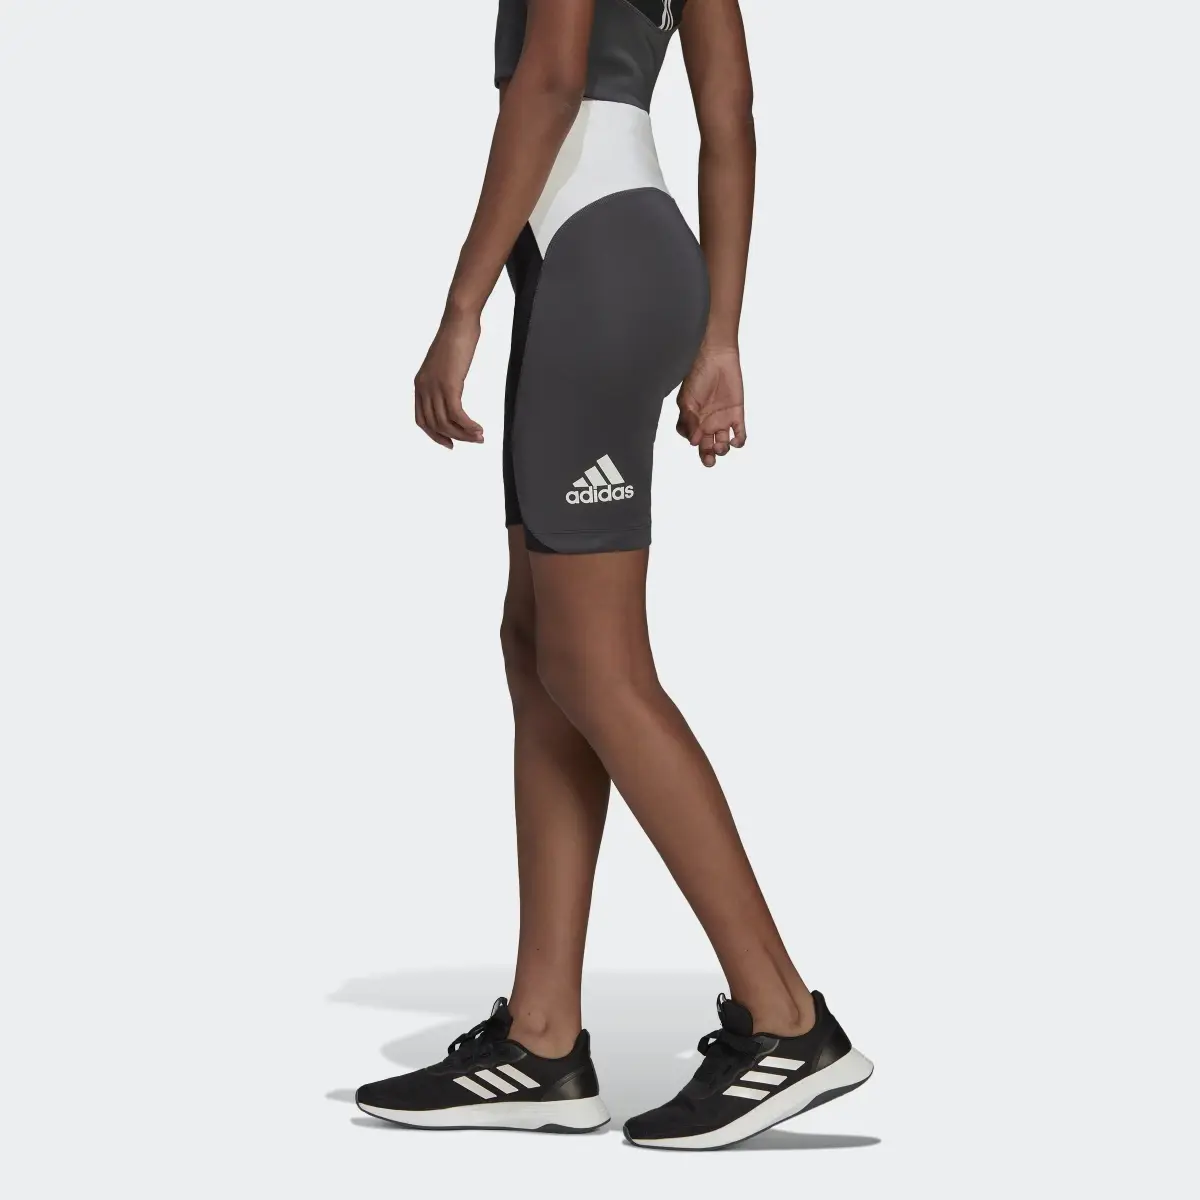 Adidas Designed to Move Colorblock Short Sport Tights. 2